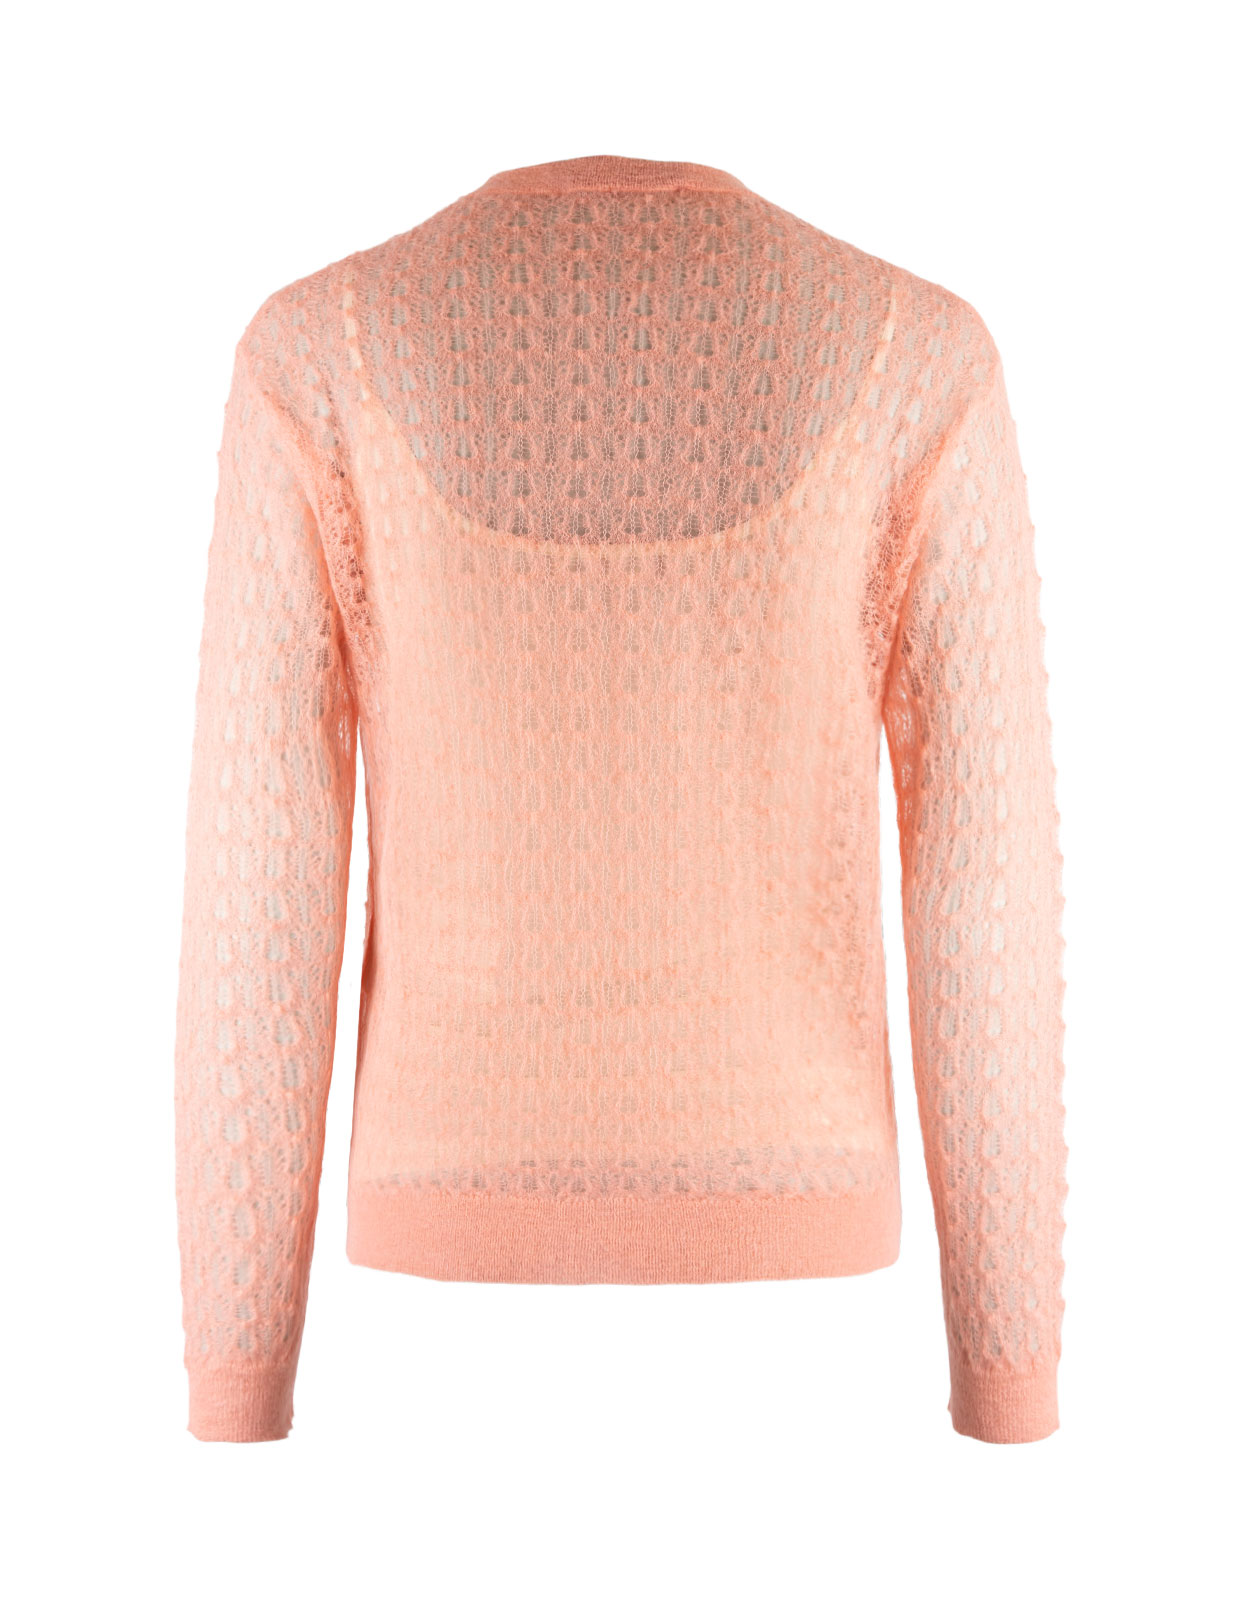 Palato Knitted Top Tangerine